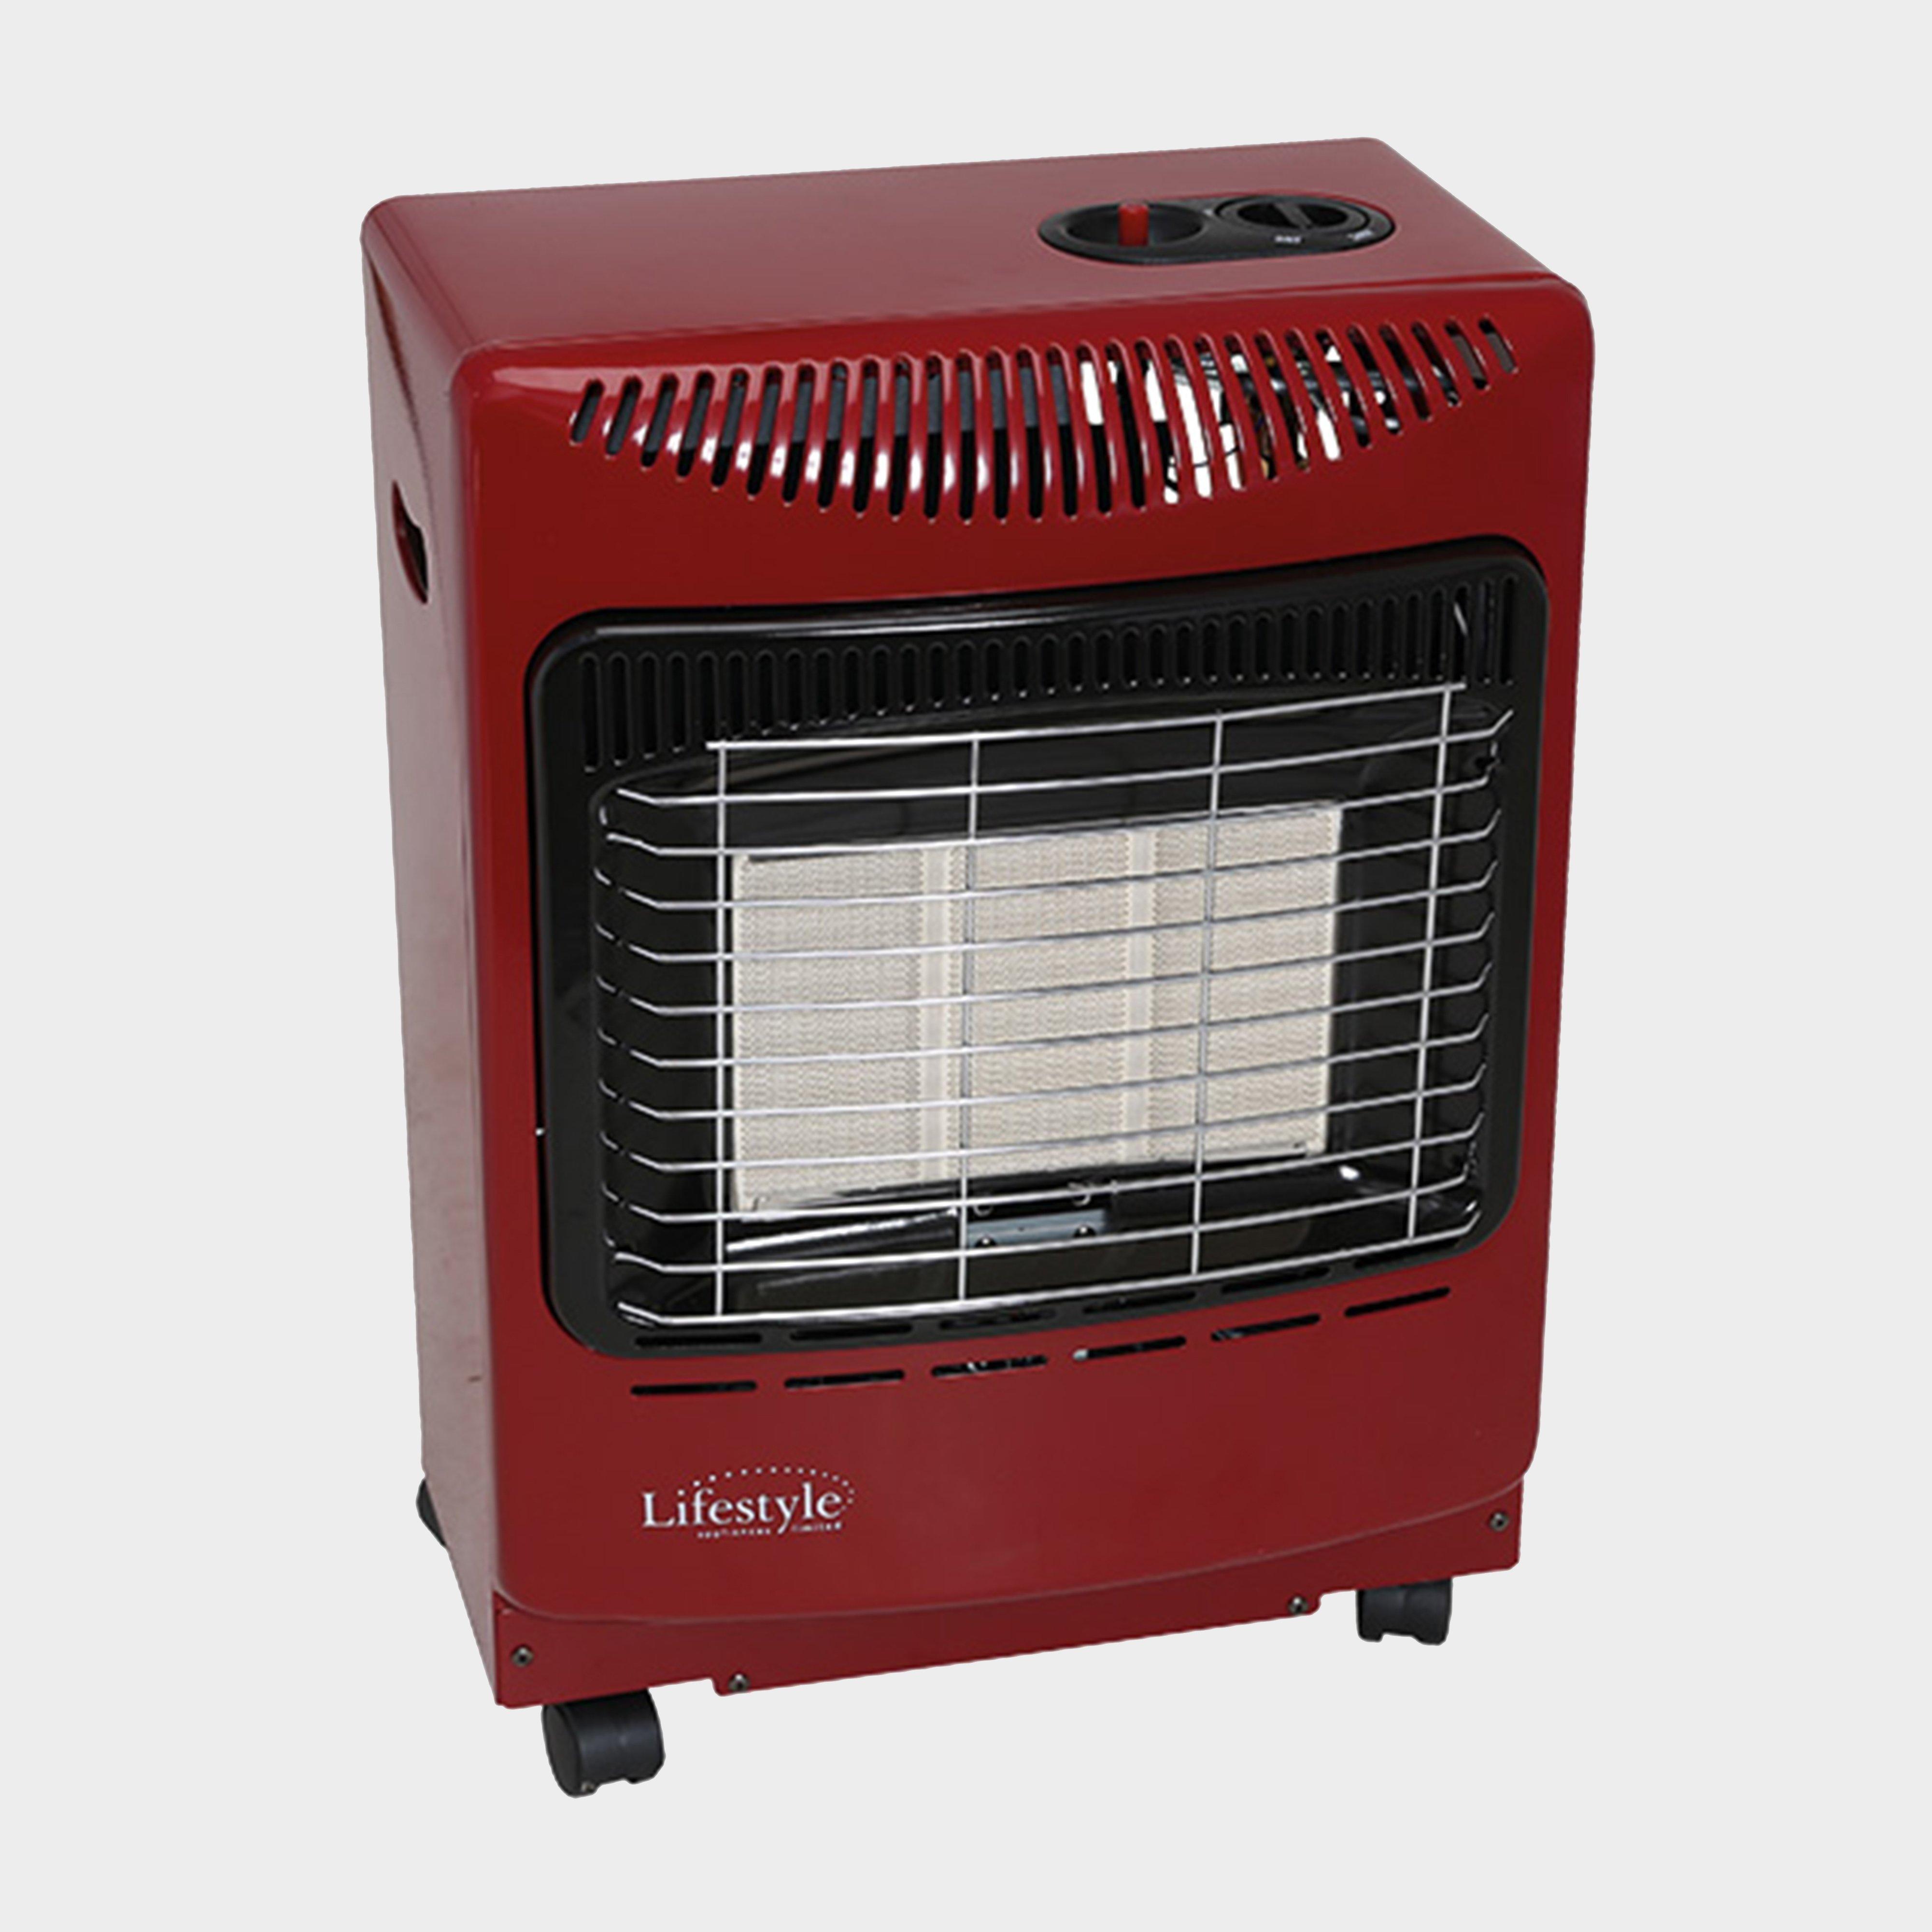  Quest Small Gas Cabinet Heater, Red